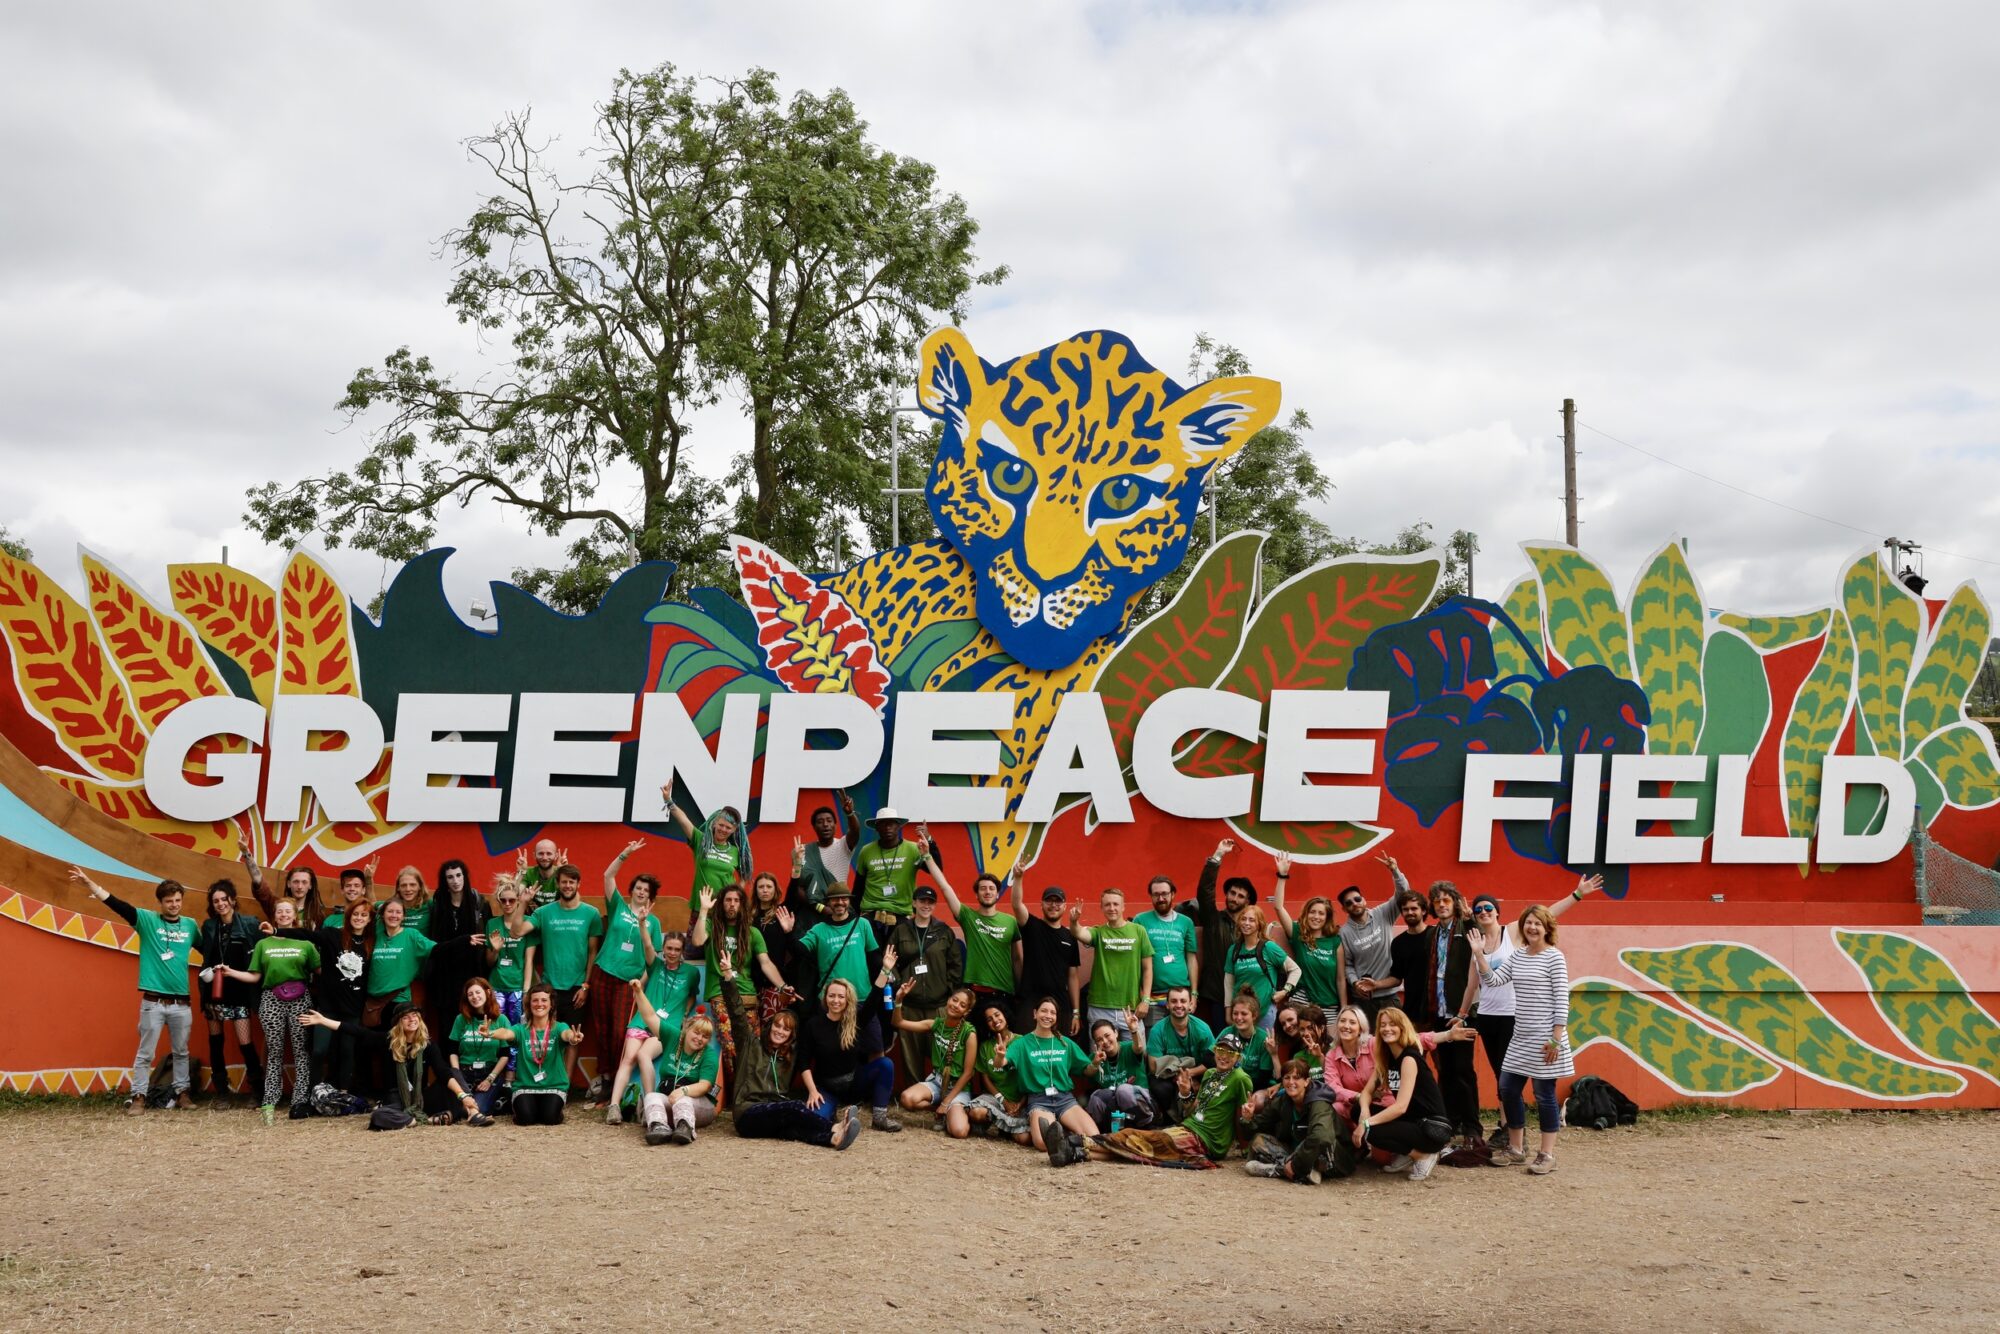 A group of about 30 people in Greenpeace t-shirts stand in front of a giant display board that says Greenpeace Field with colourful jungle designs